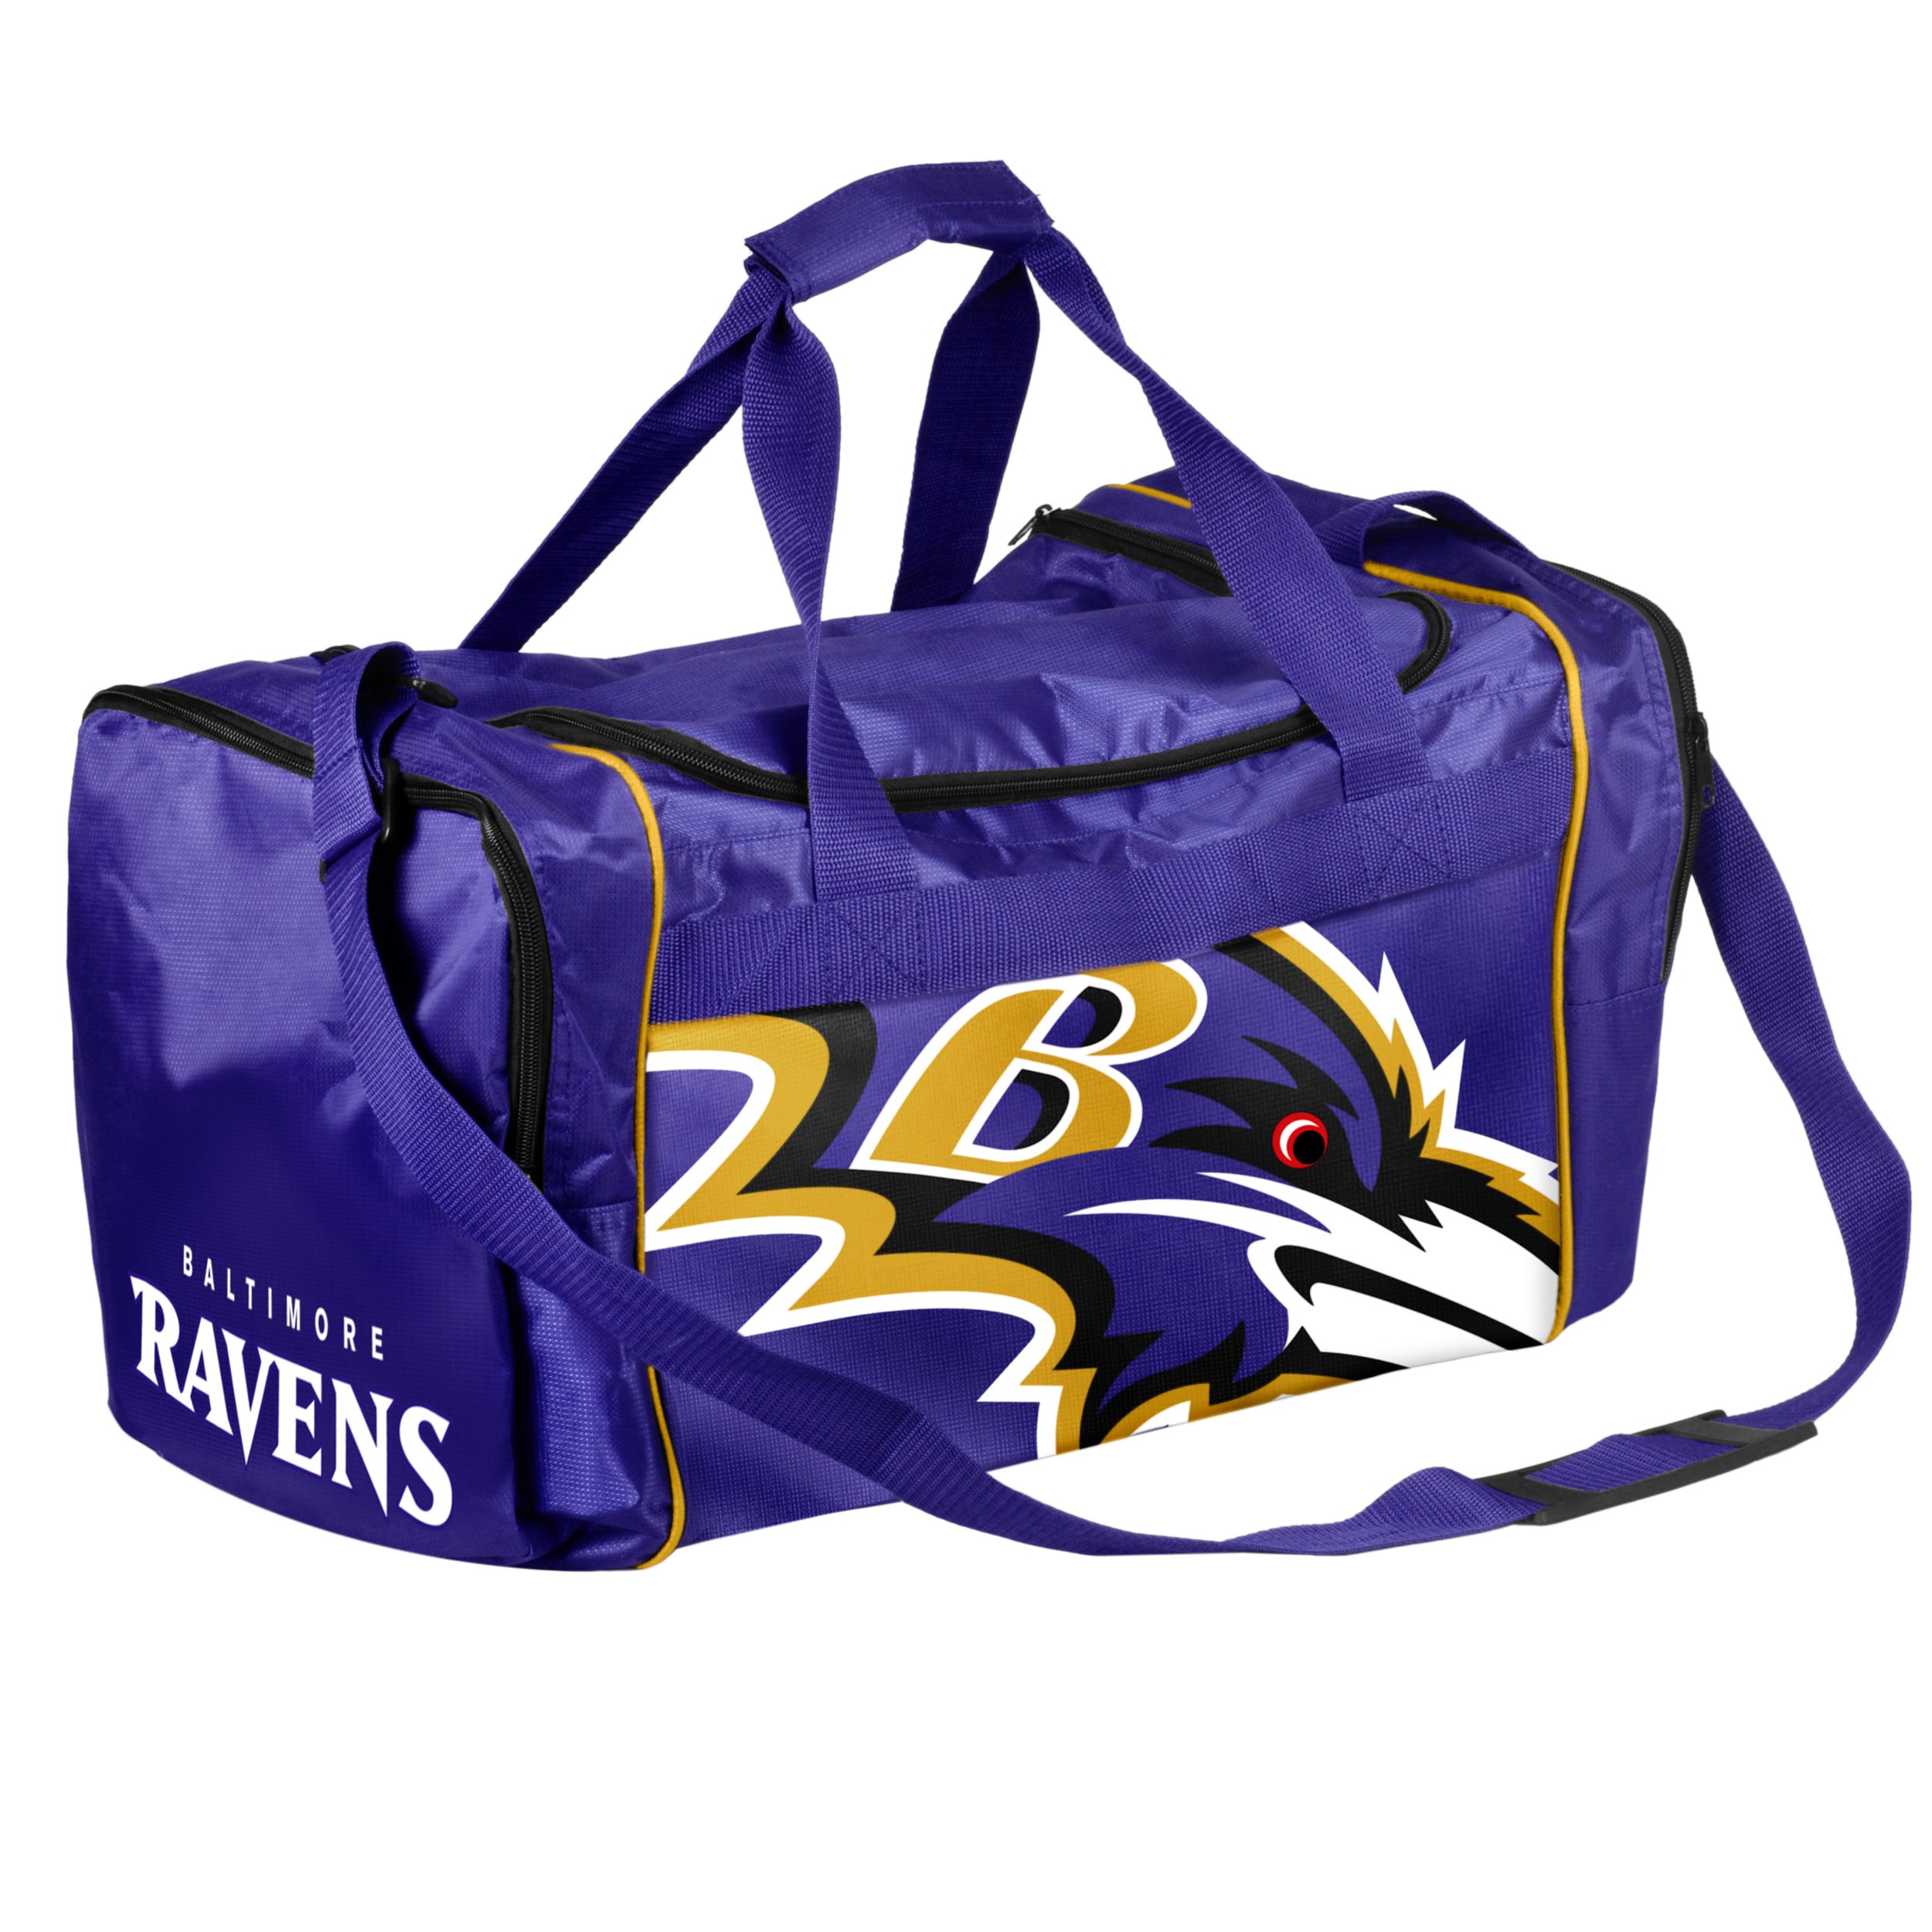 Forever Collectibles Nfl Baltimore Ravens 21 inch Core Duffle Bag